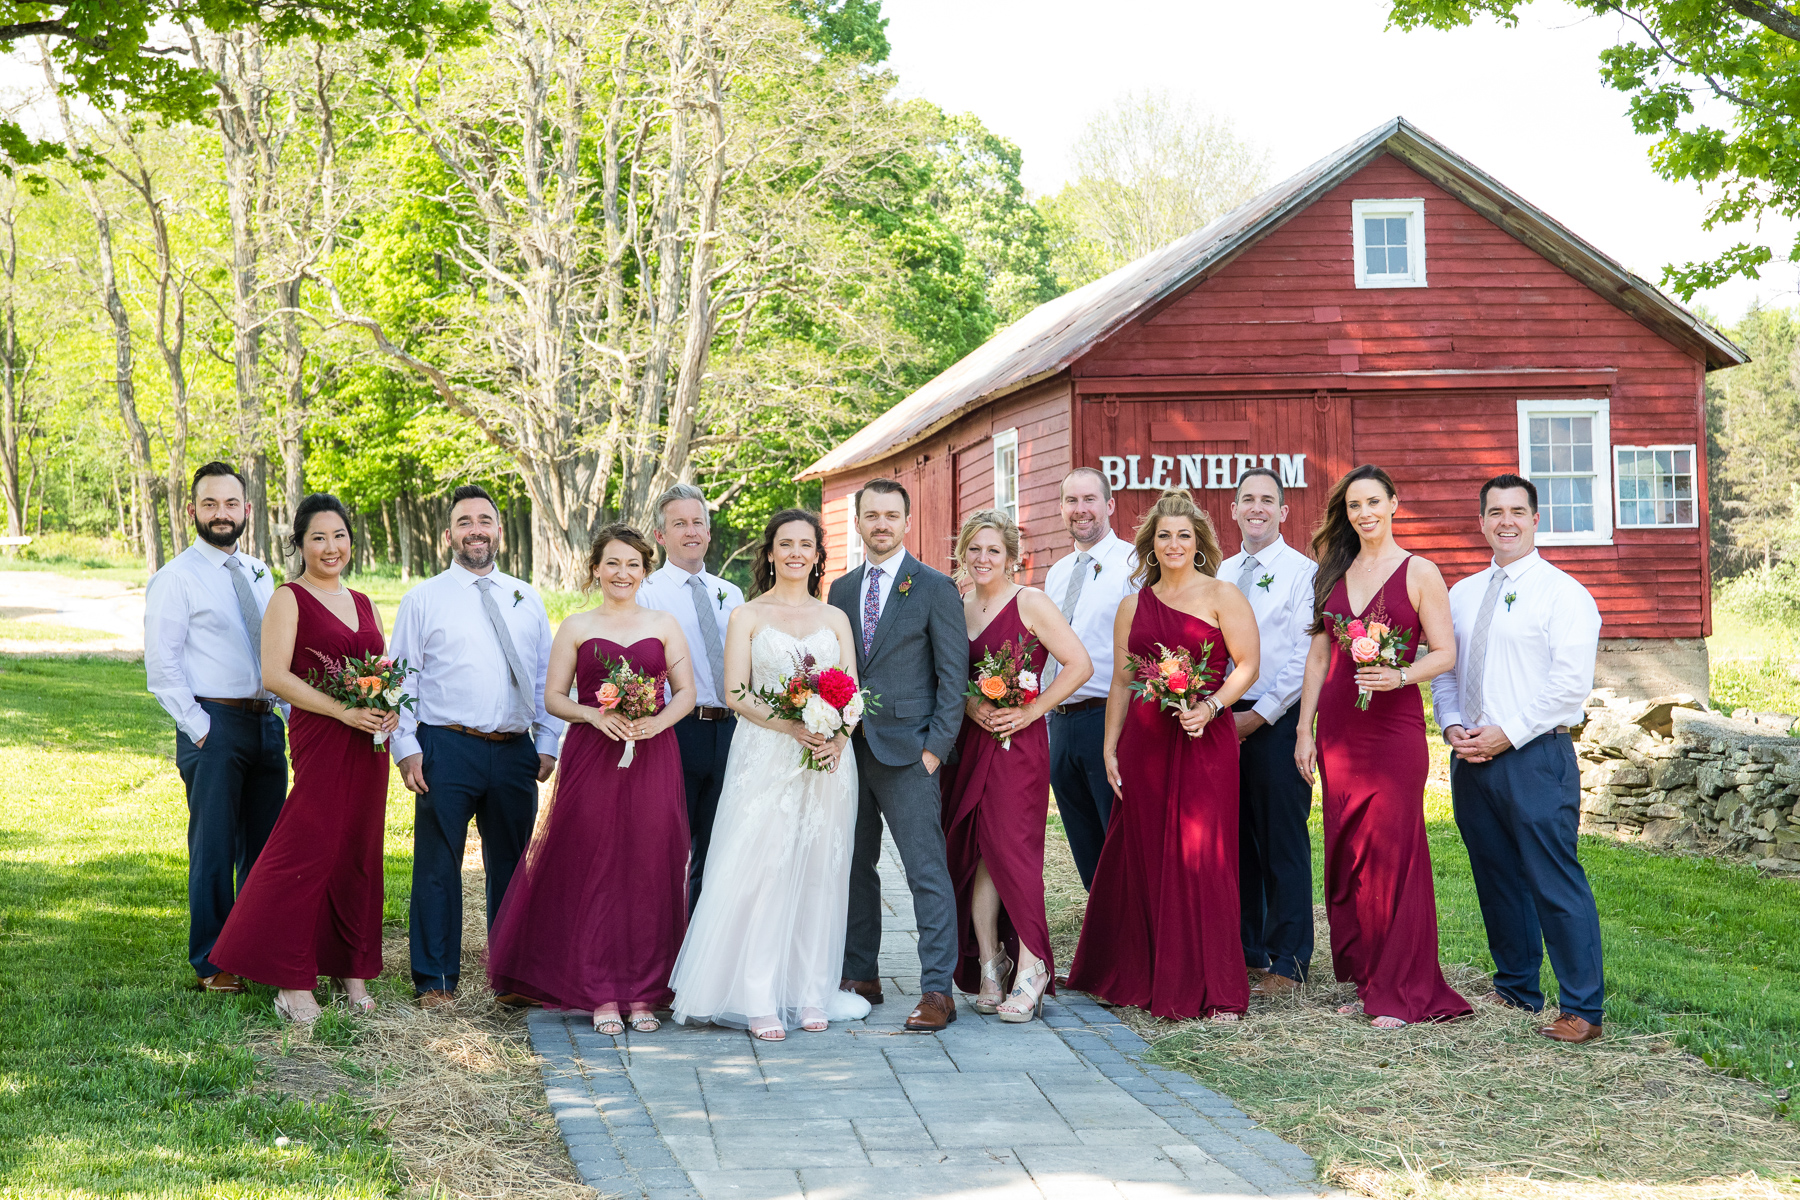 The wedding party posing for a group photo in front of the barn at Blenheim Hill Farm